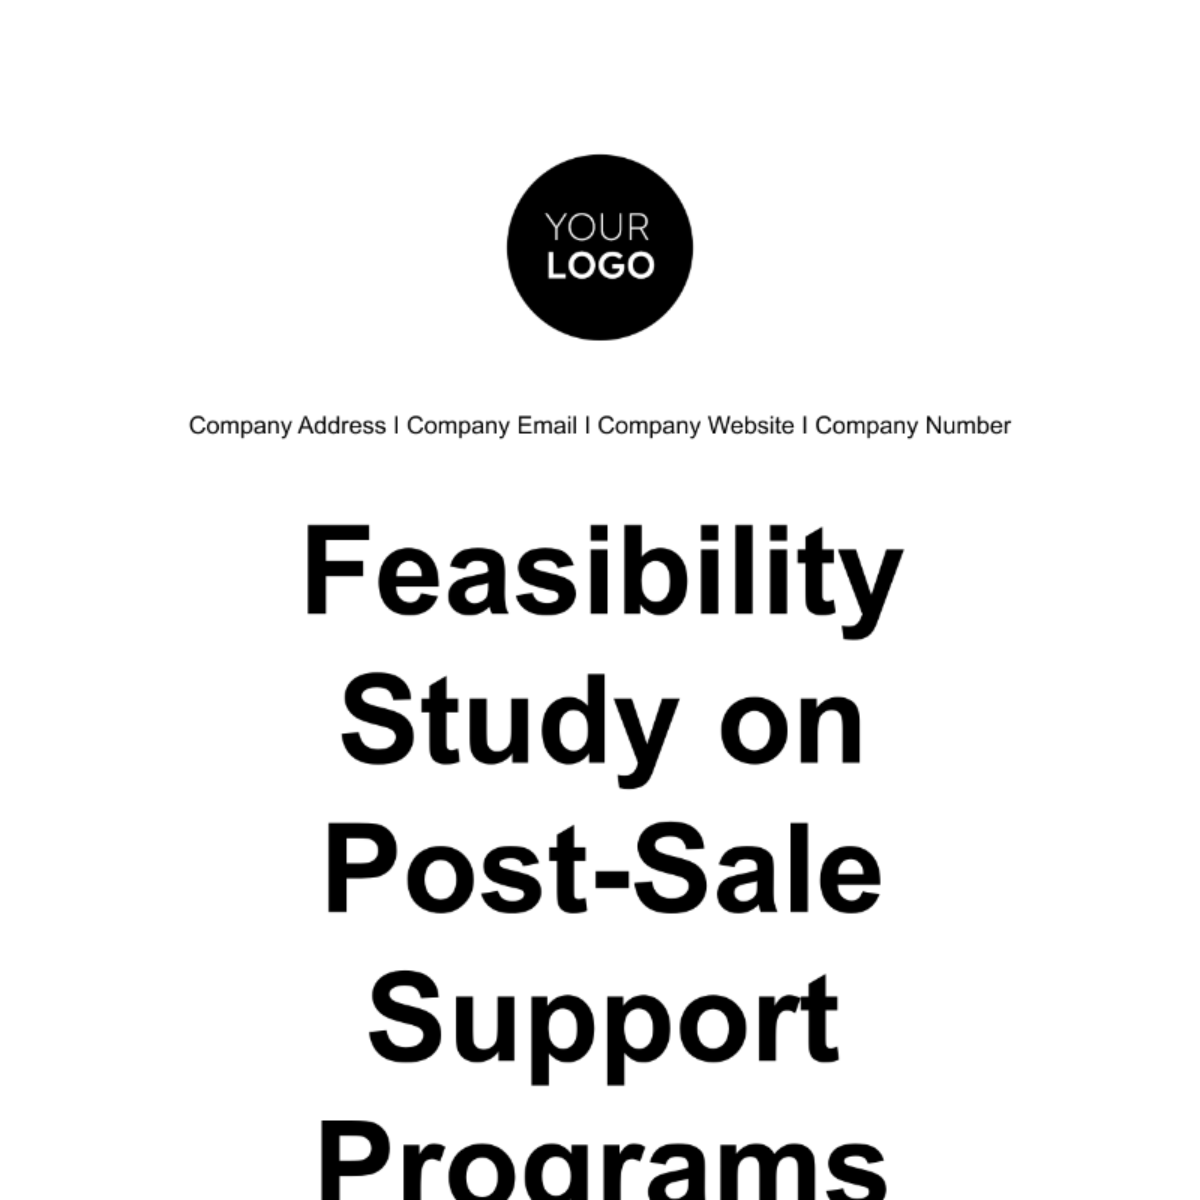 Free Feasibility Study on Post-Sale Support Programs Template